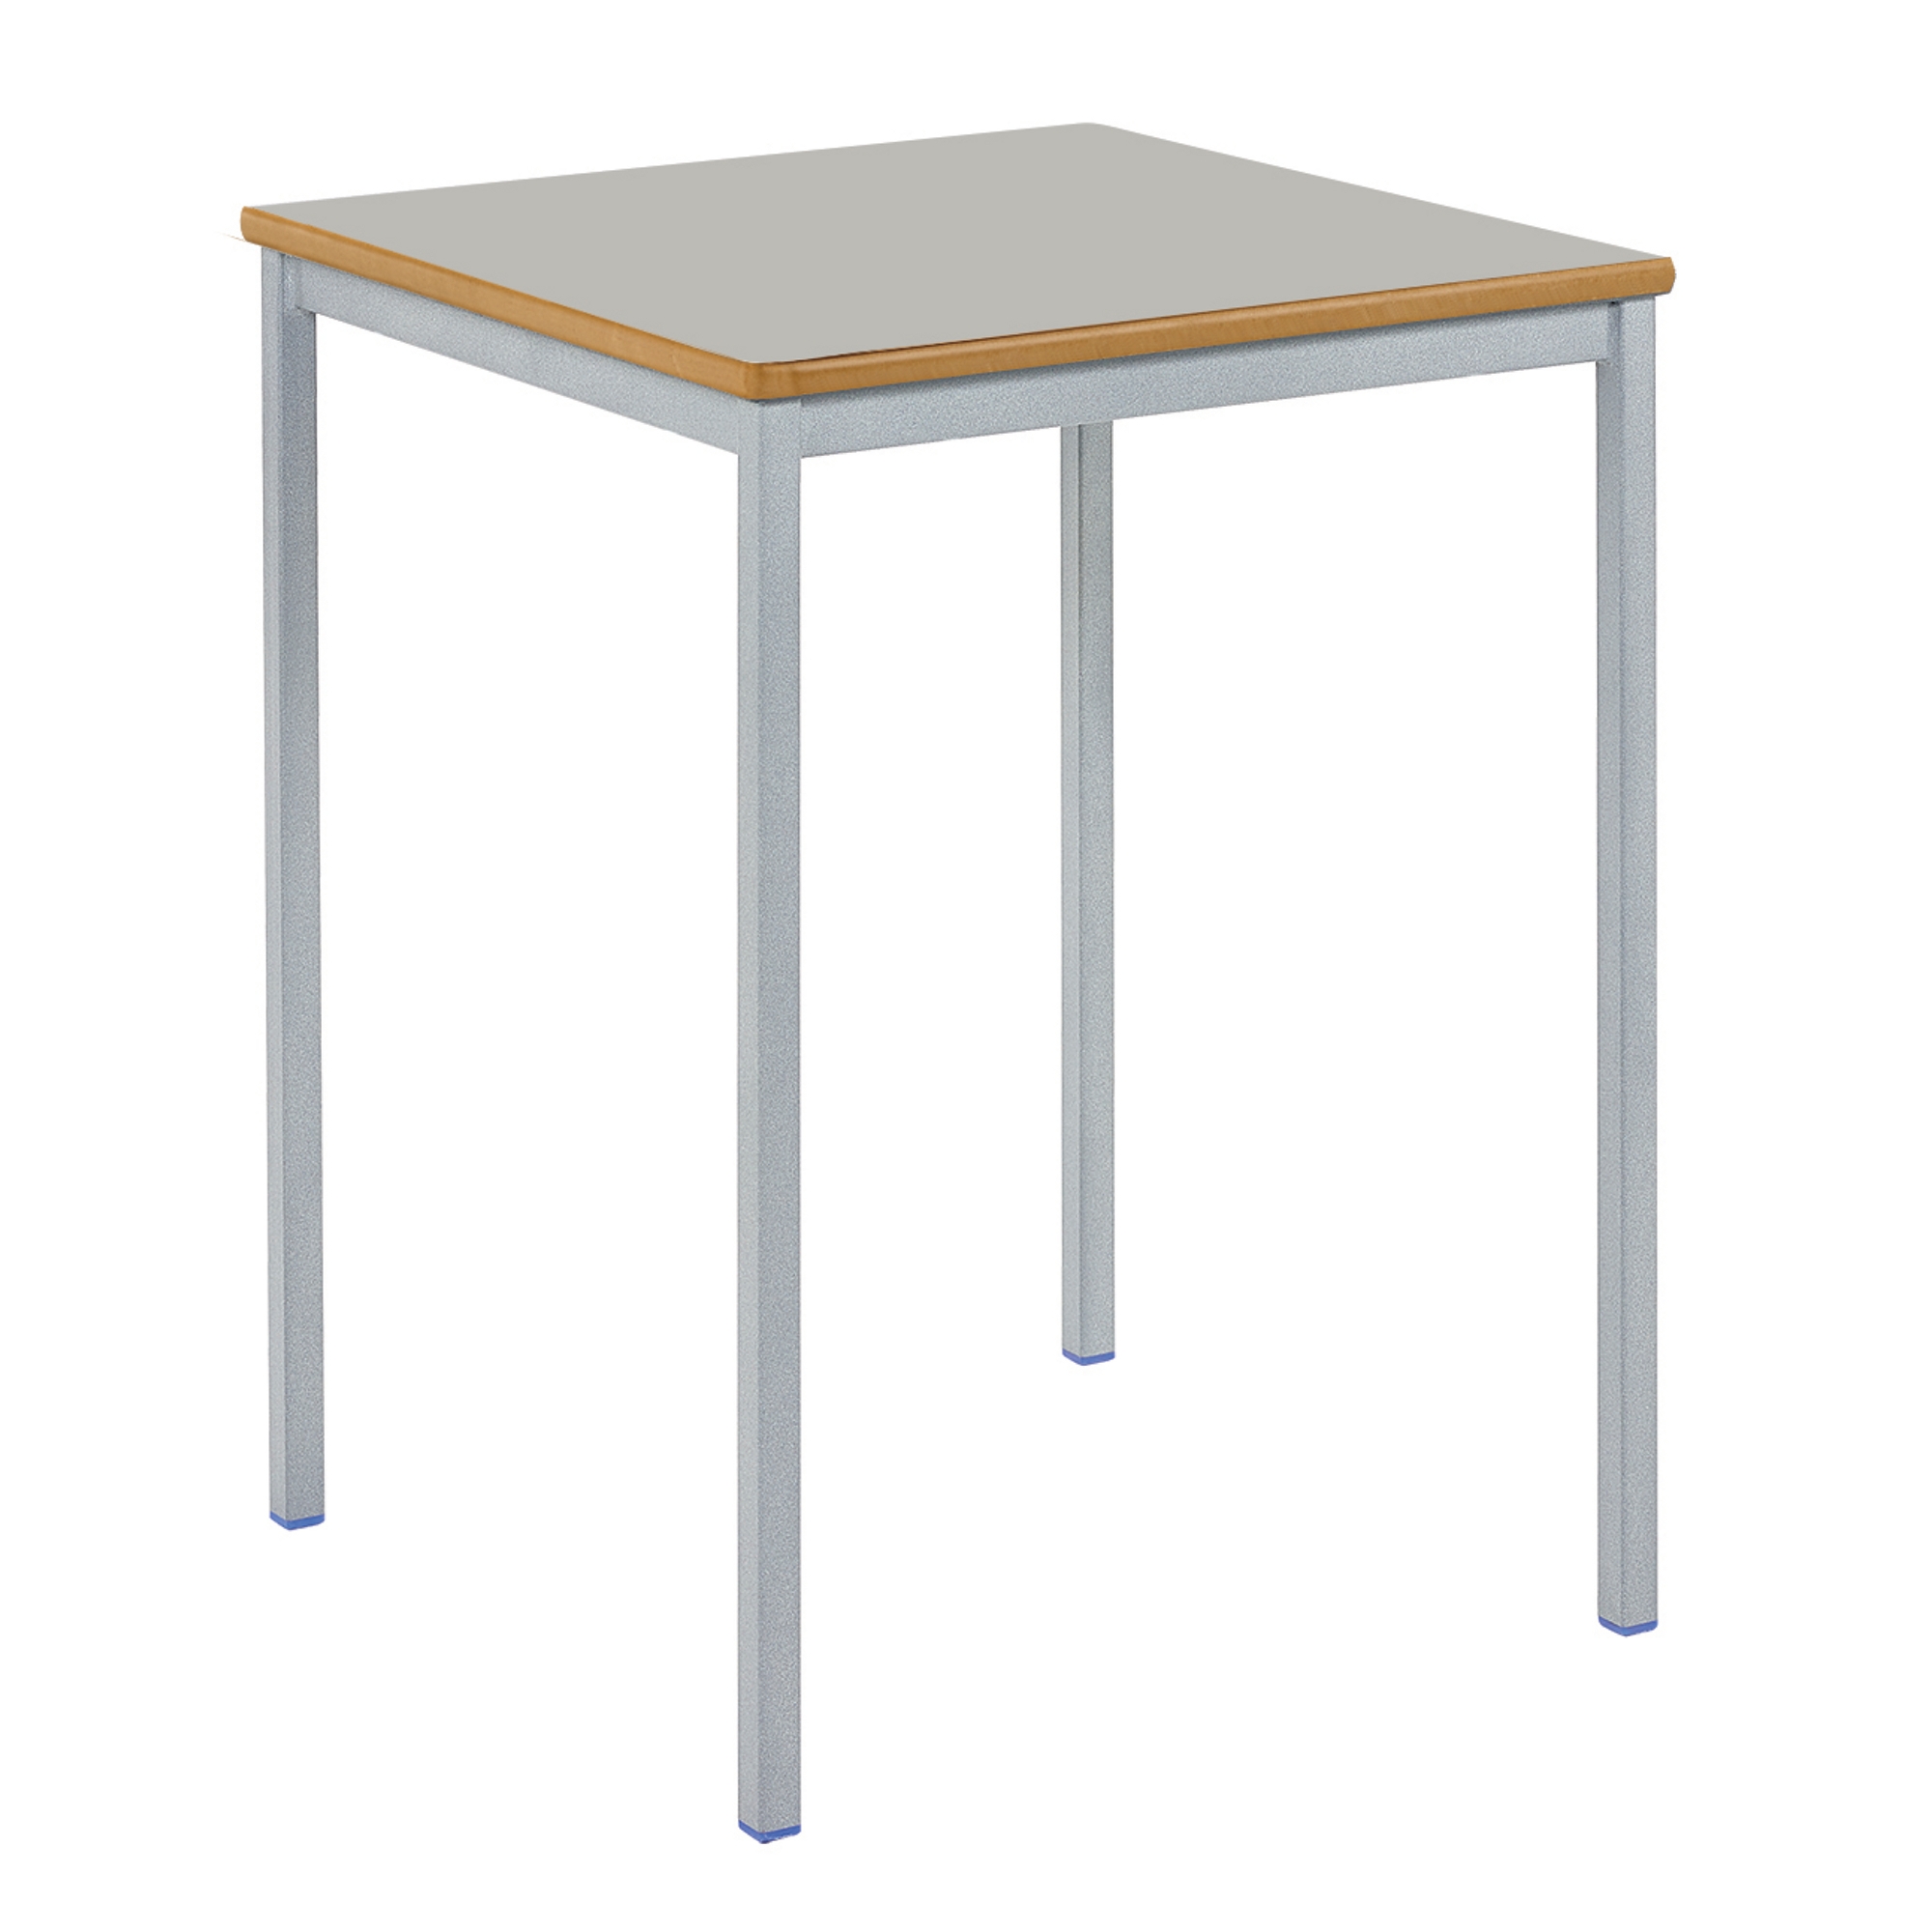 Classmates Square Fully Welded Classroom Table - 600 x 600 x 460mm - Grey